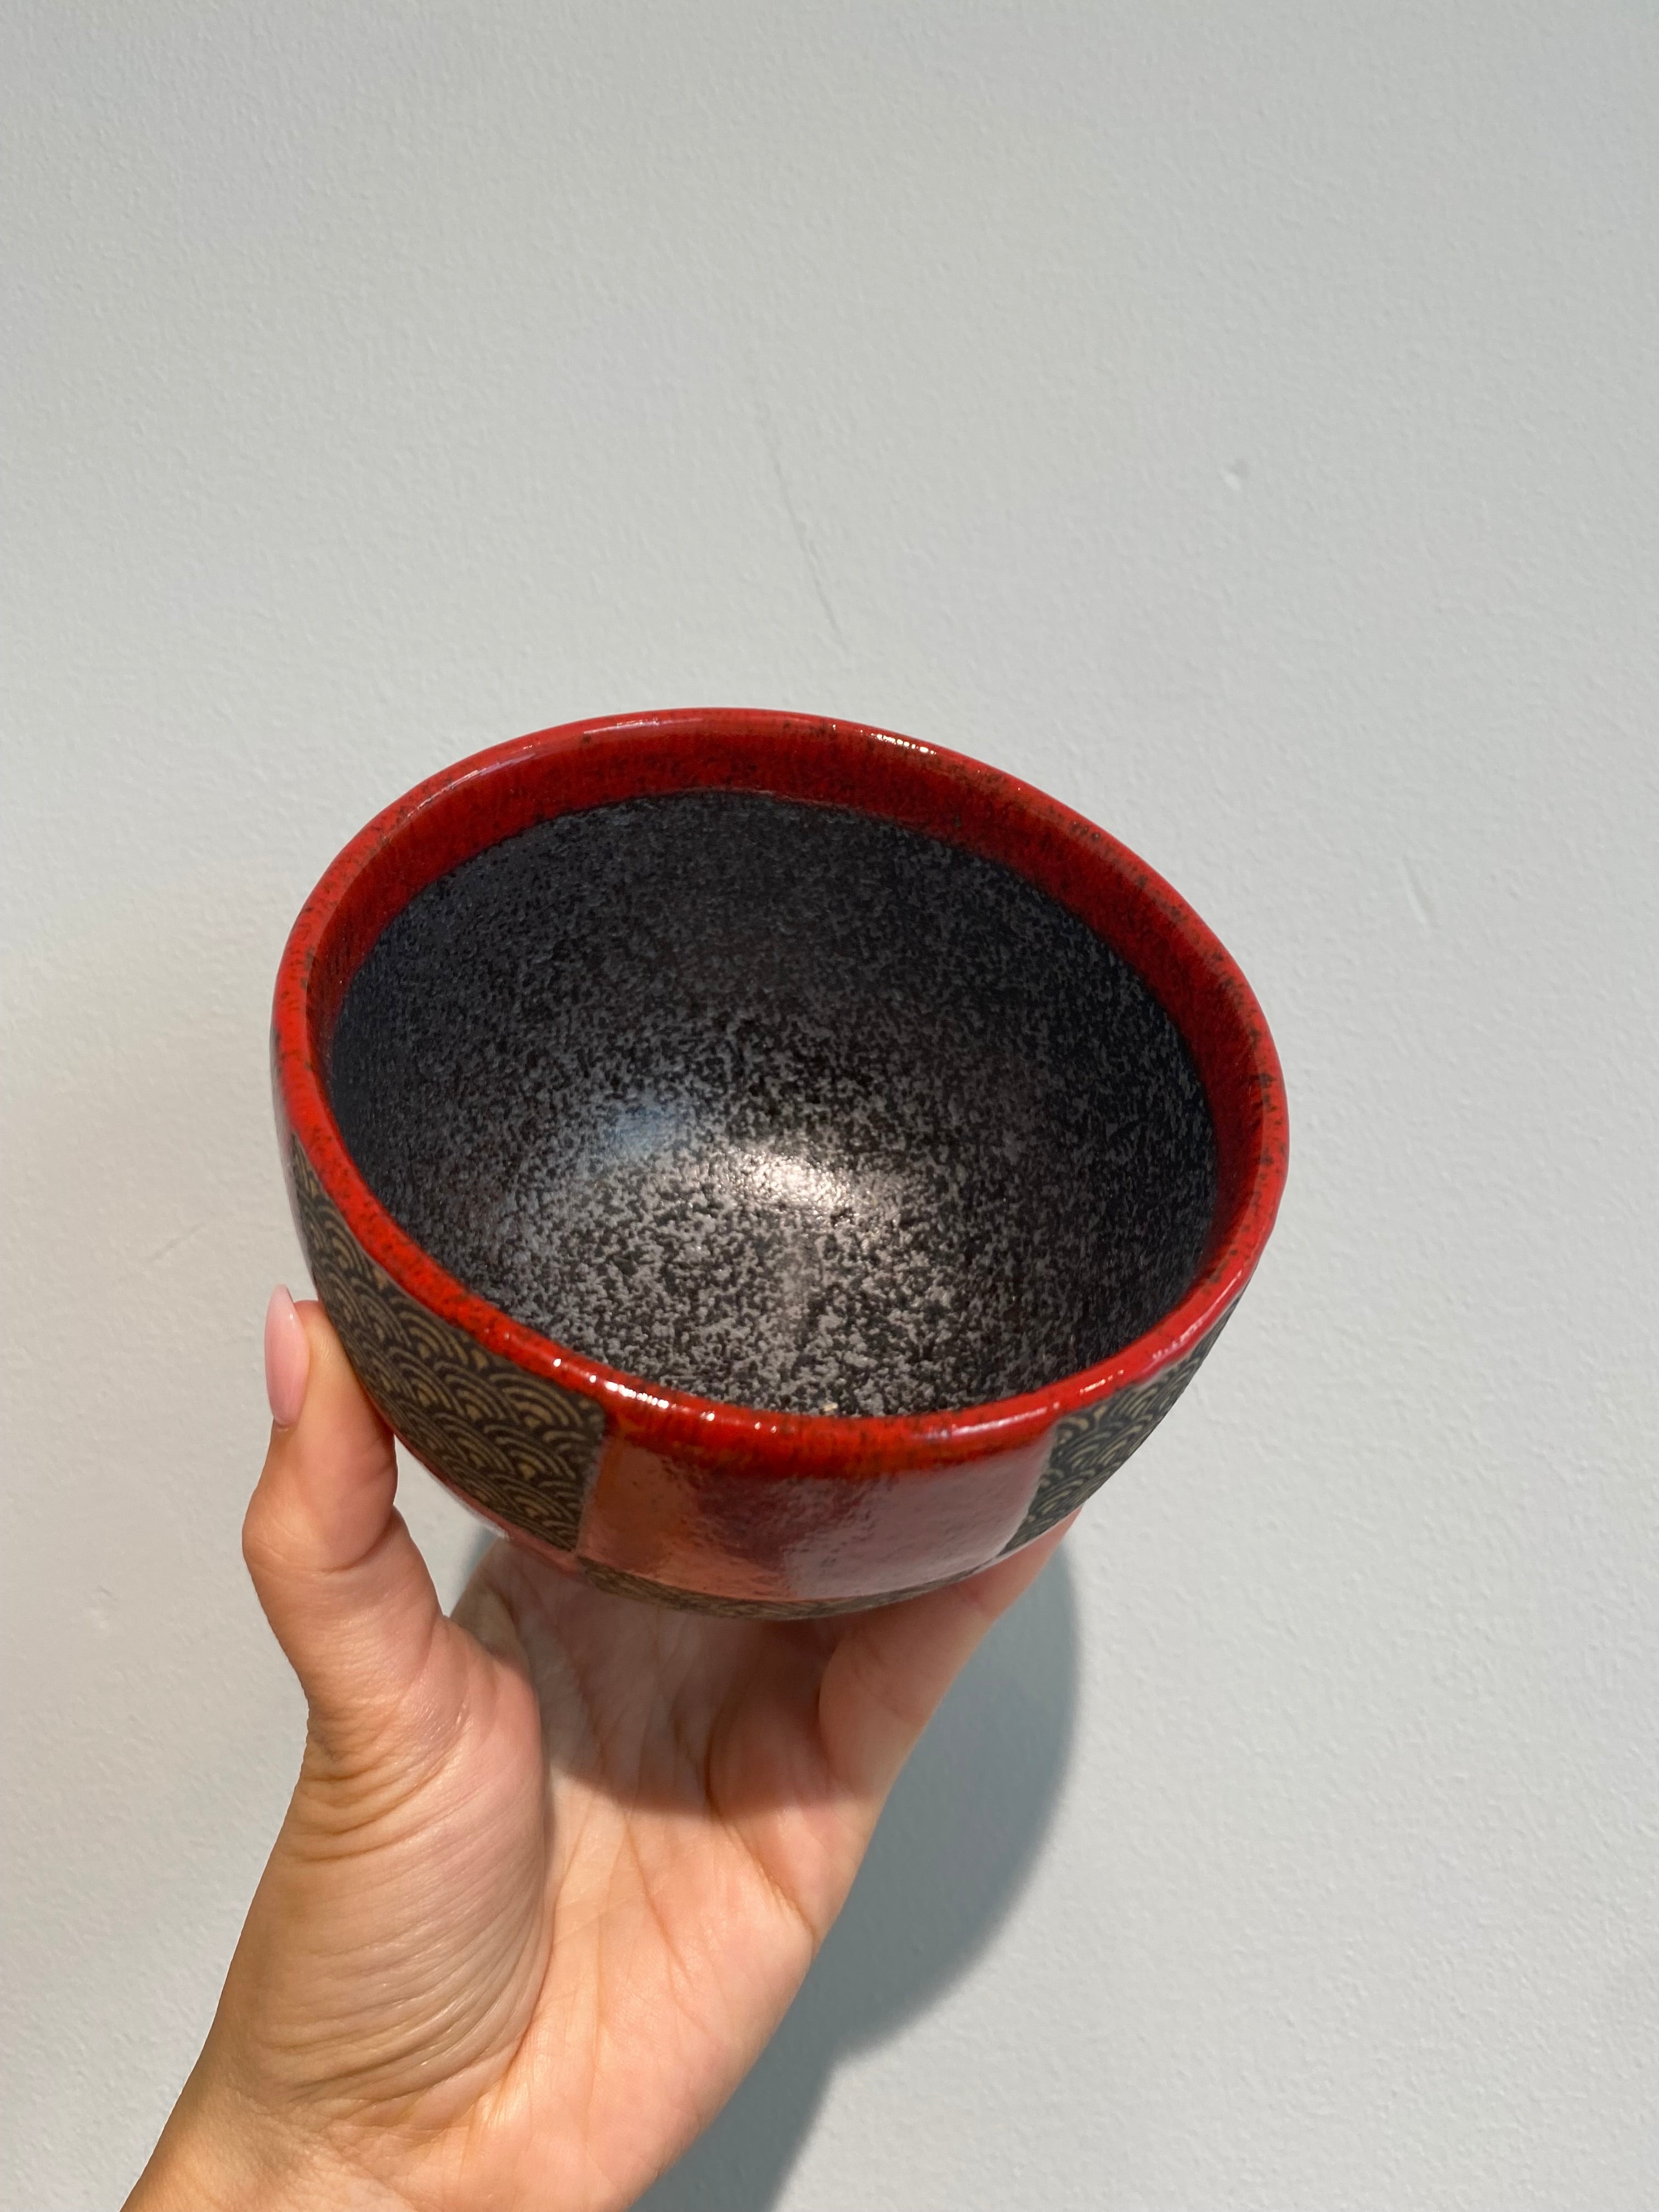 Ceramic bowl with red checks and Japanese patterns